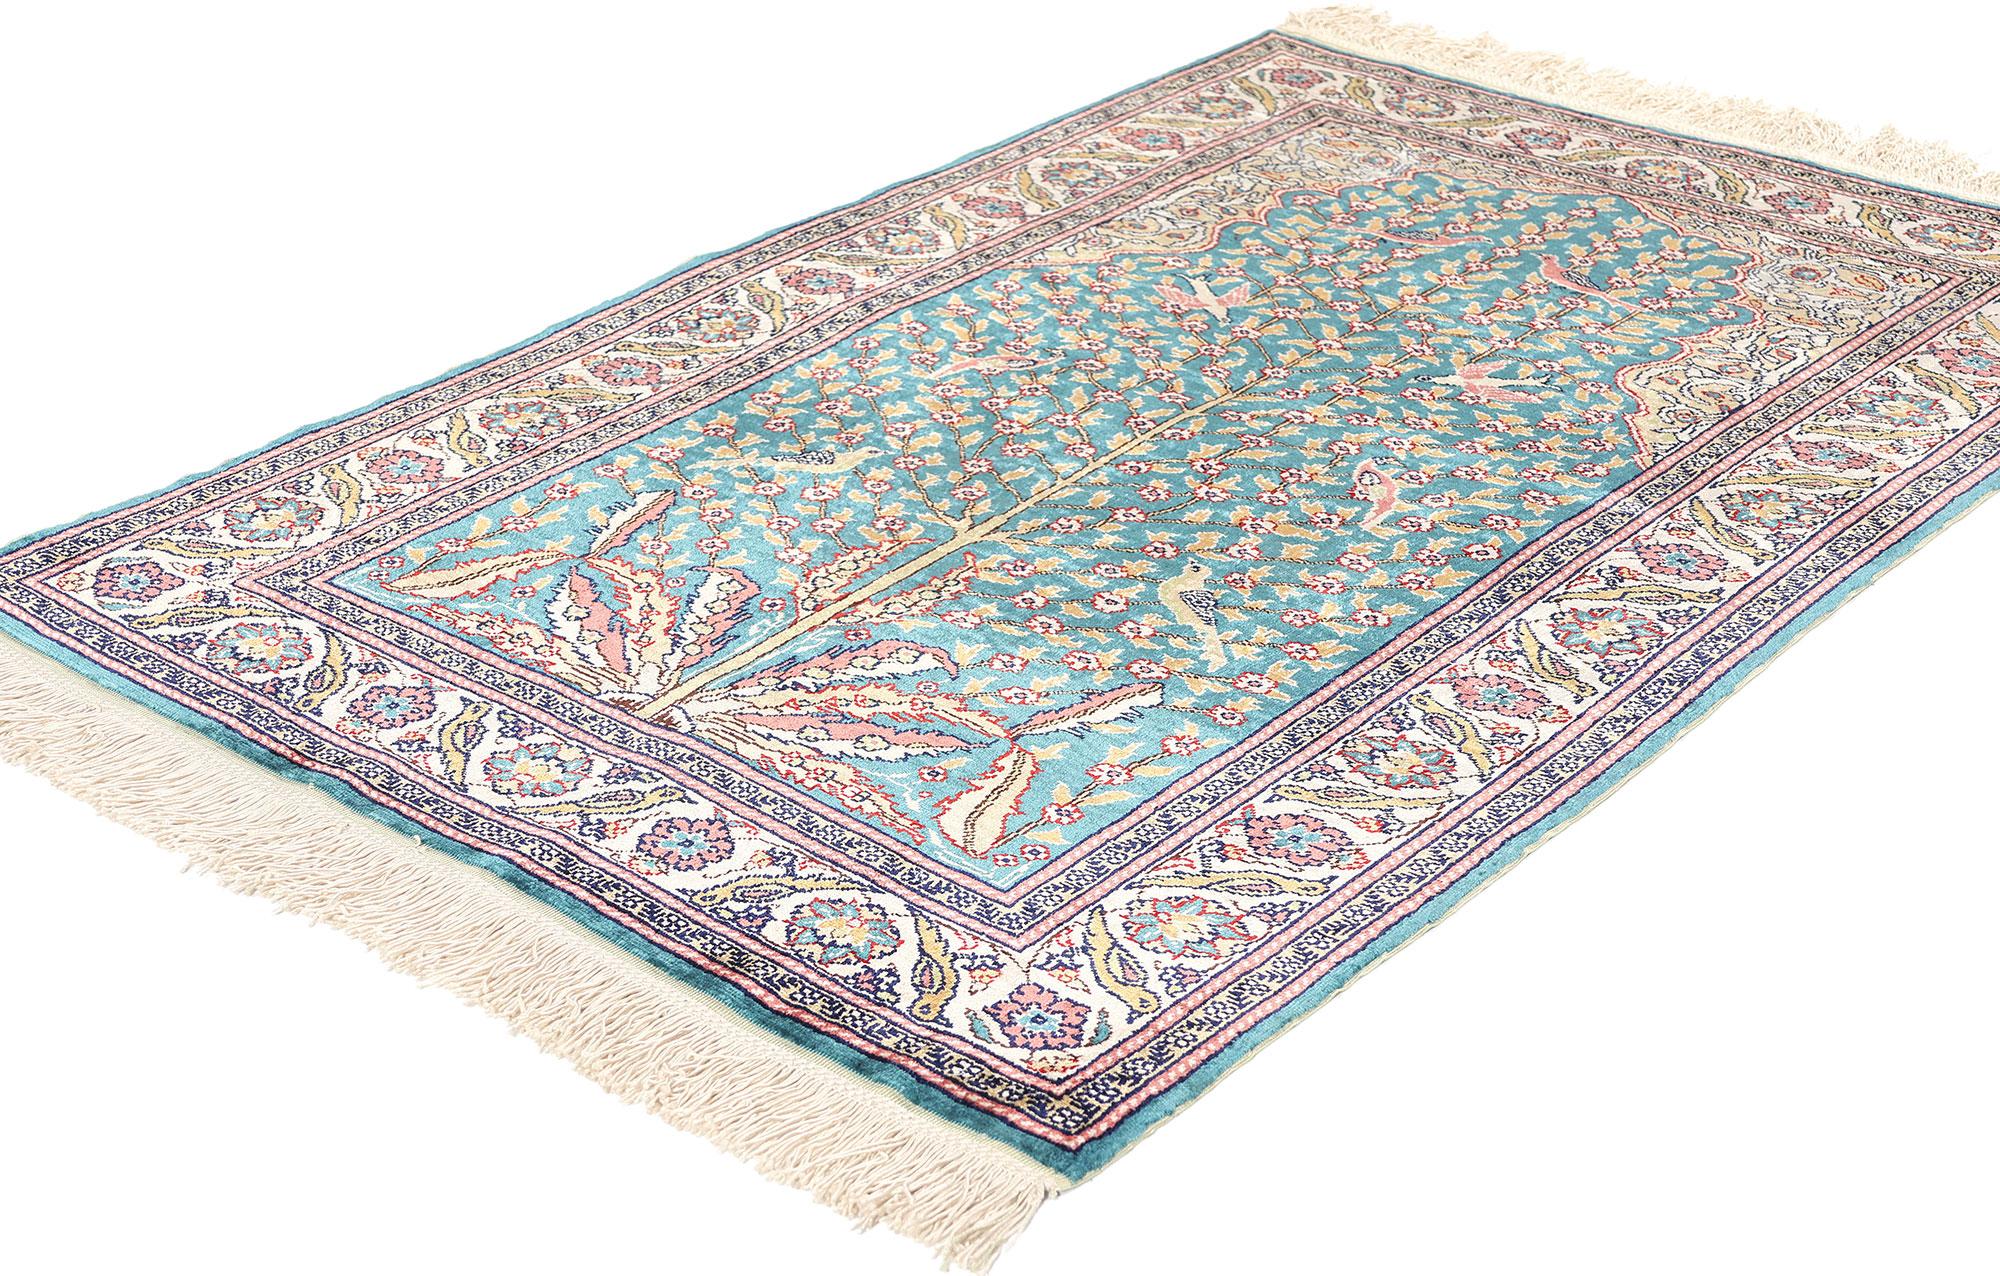 78777 Vintage Turkish Silk Kayseri Tree of Life Prayer Rug, 02'09 x 04'02. In the enchanting realm of Turkish craftsmanship, the Kayseri Tree of Life rugs emerge as radiant treasures, known also as Islamic Sajdah prayer mats. Woven with delicate